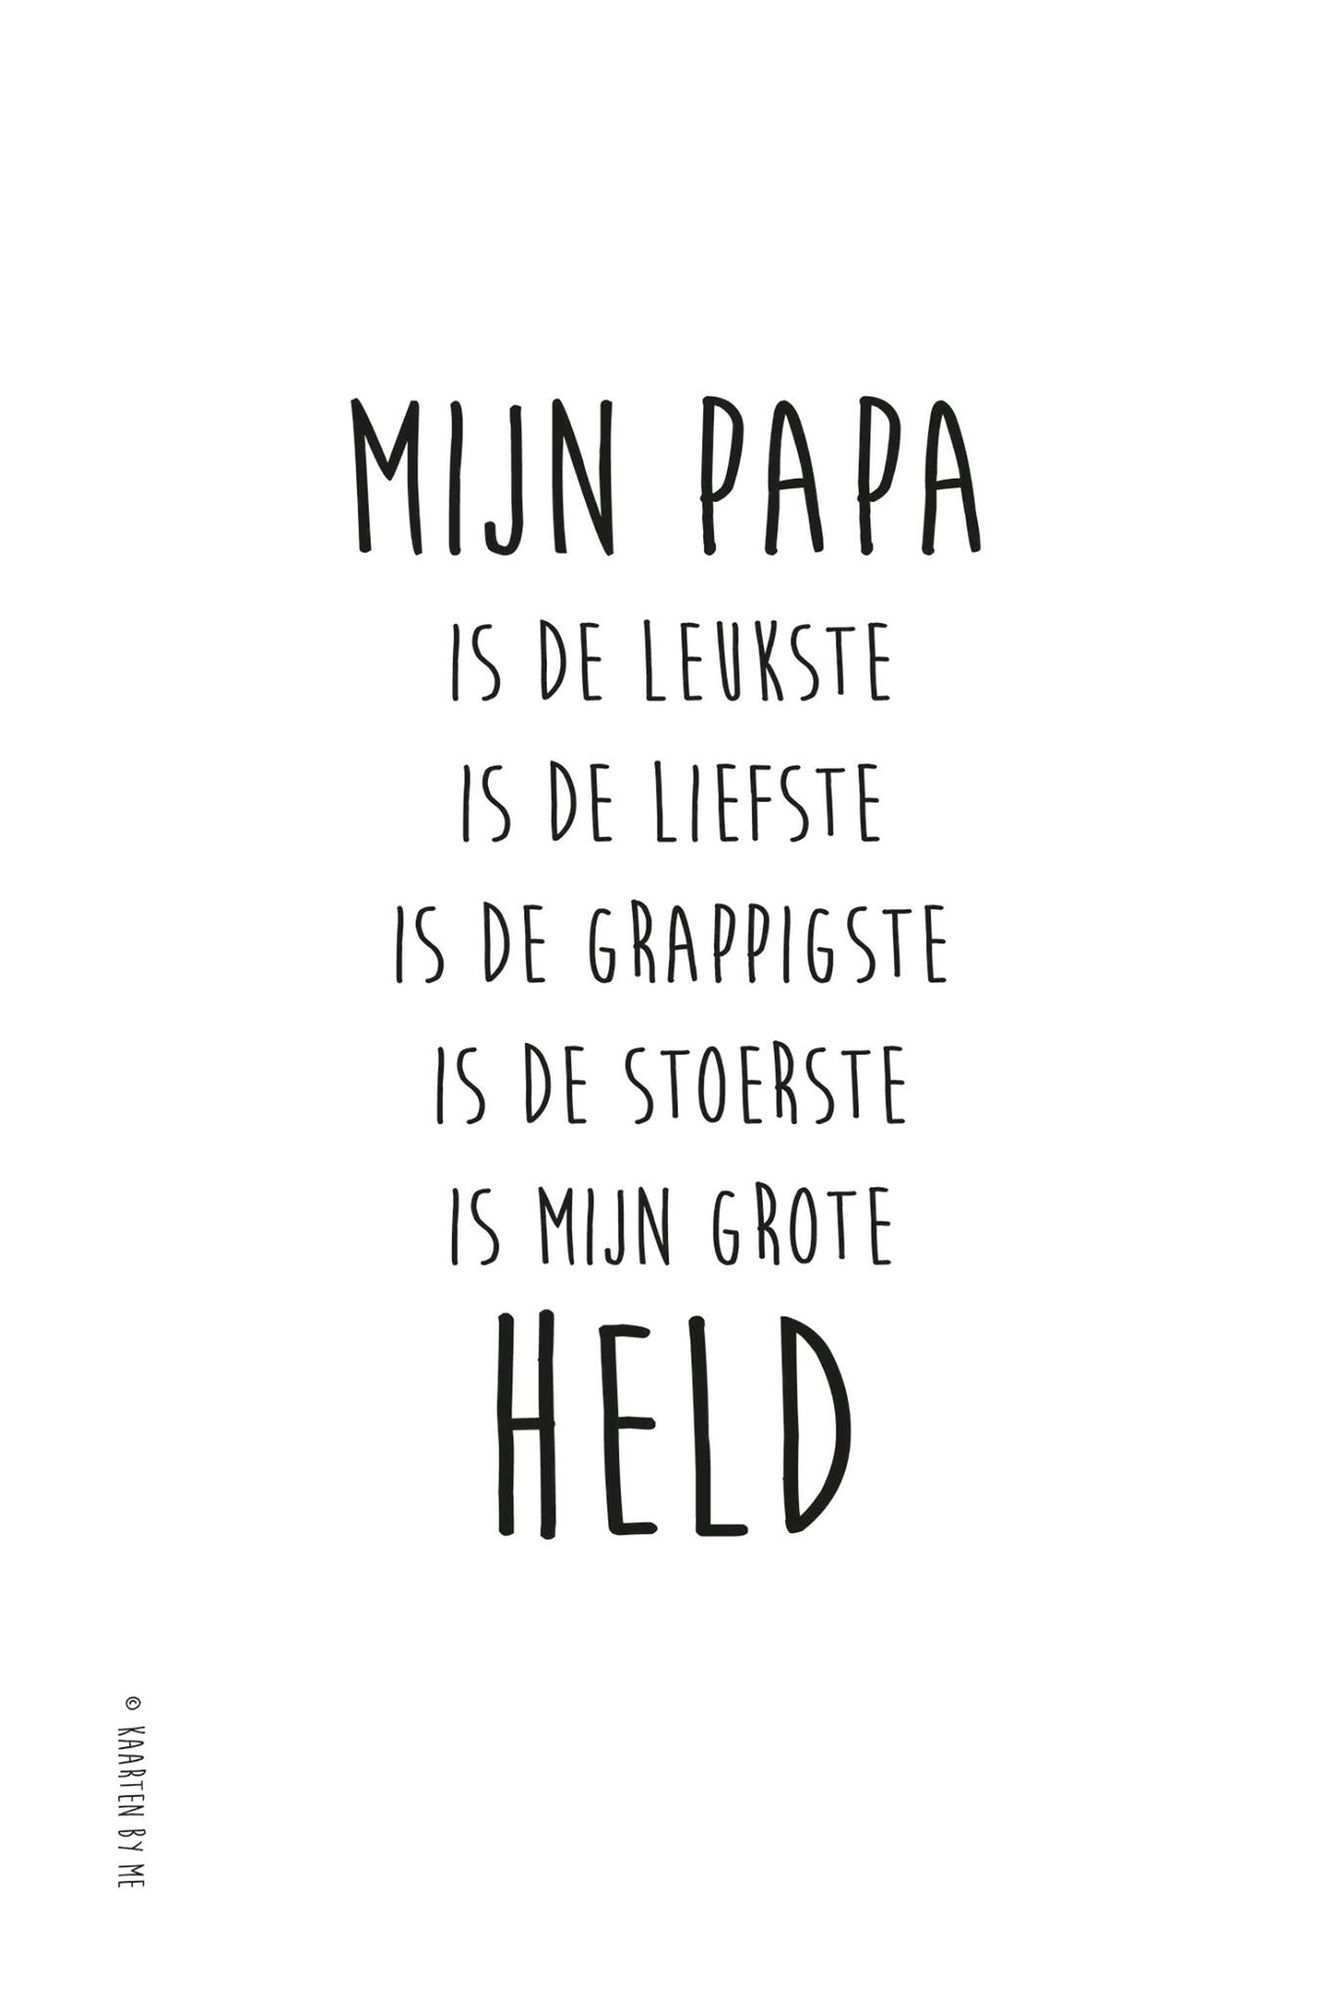 Father S Day Father Fathersday Quotes Card Dutch Vader Papa Vaderdag Vaderdag Vaderda